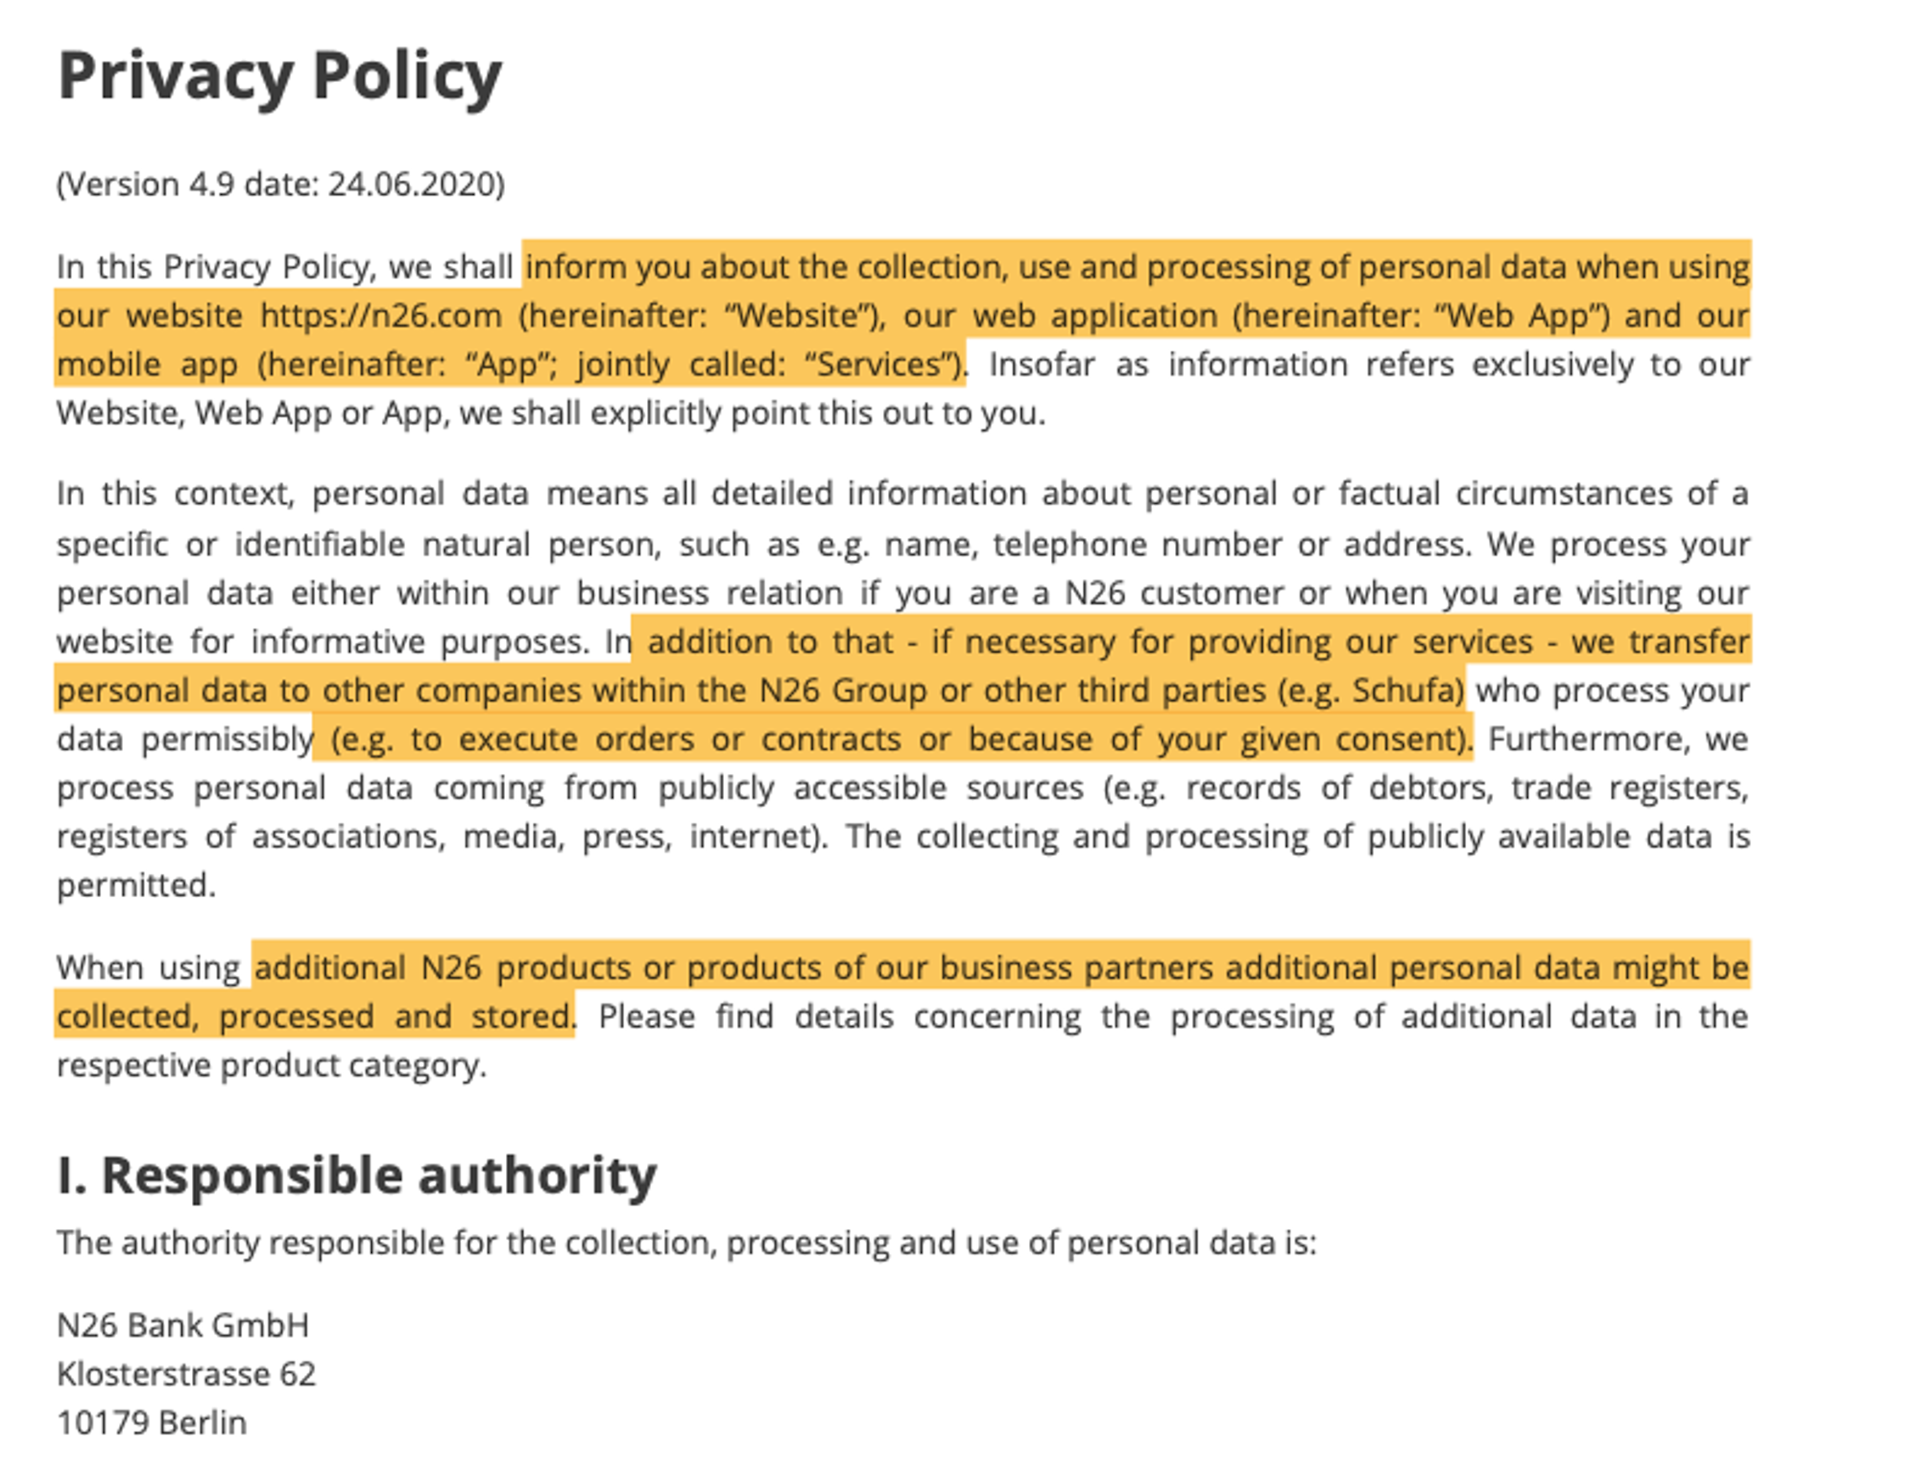 Excerpt from the policy - Find the full version here https://n26.com/en-eu/legal-documents/privacy-policy